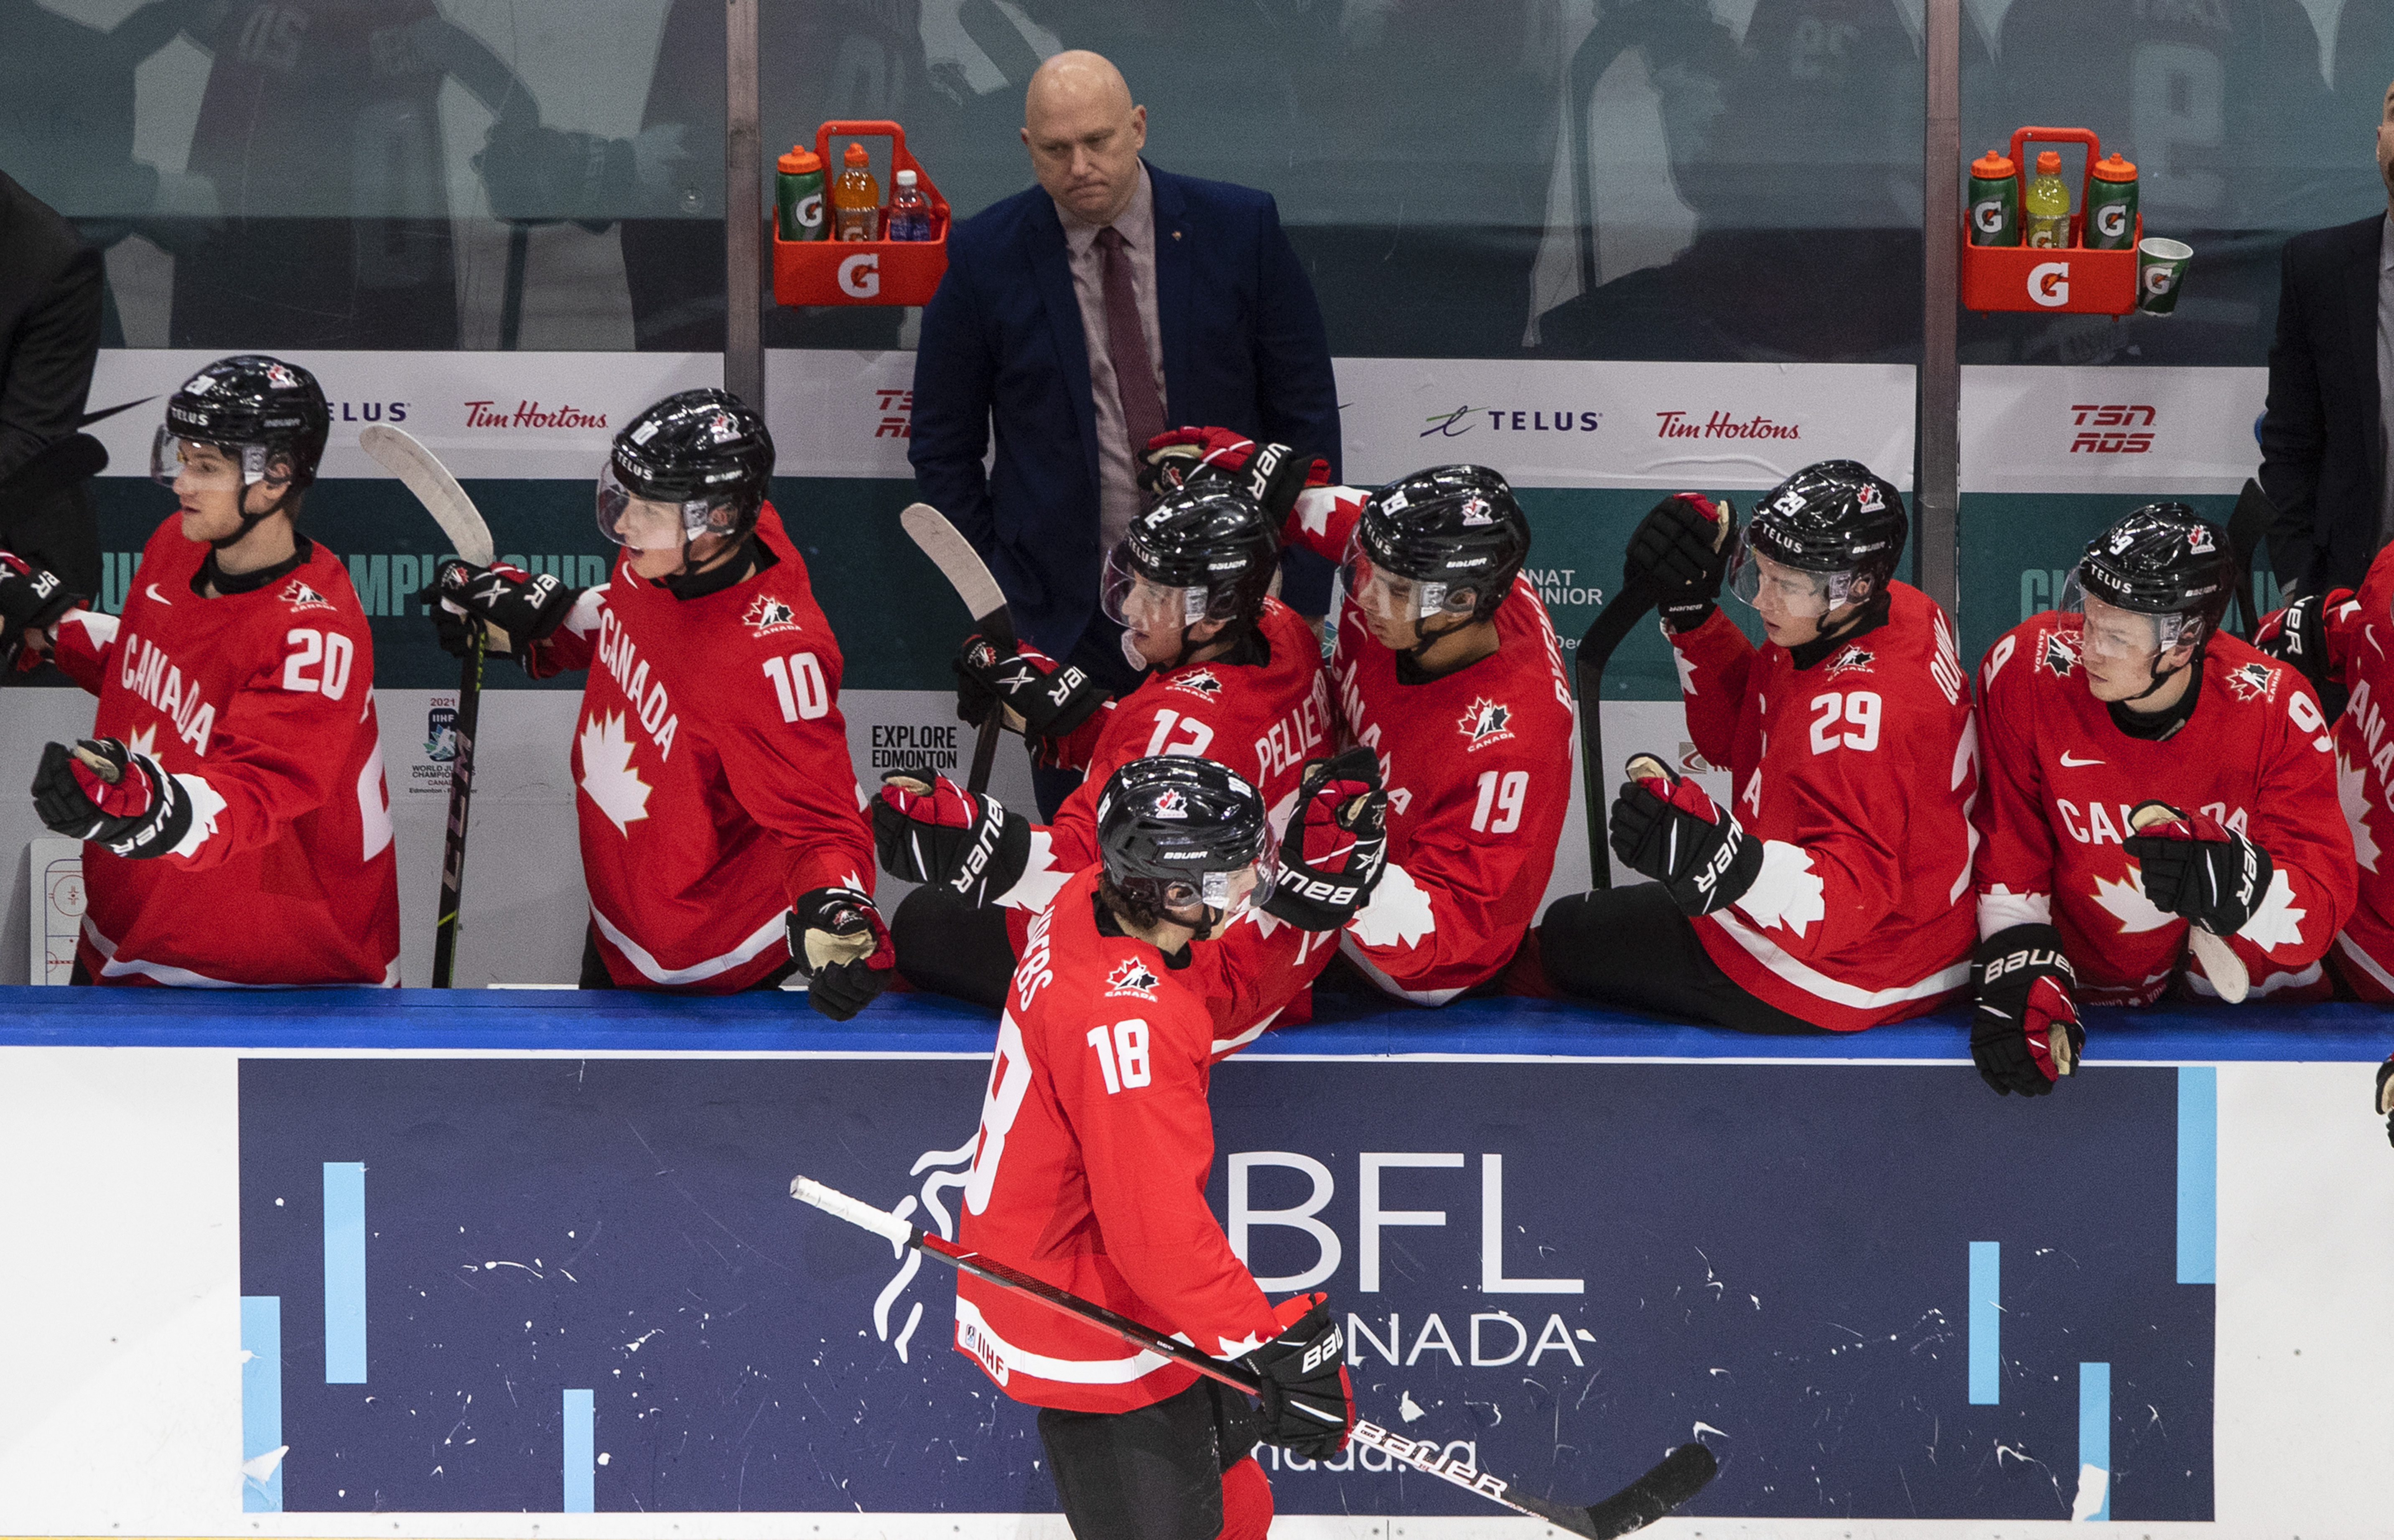 World Juniors What to expect from the 2022 tournament - Team Canada